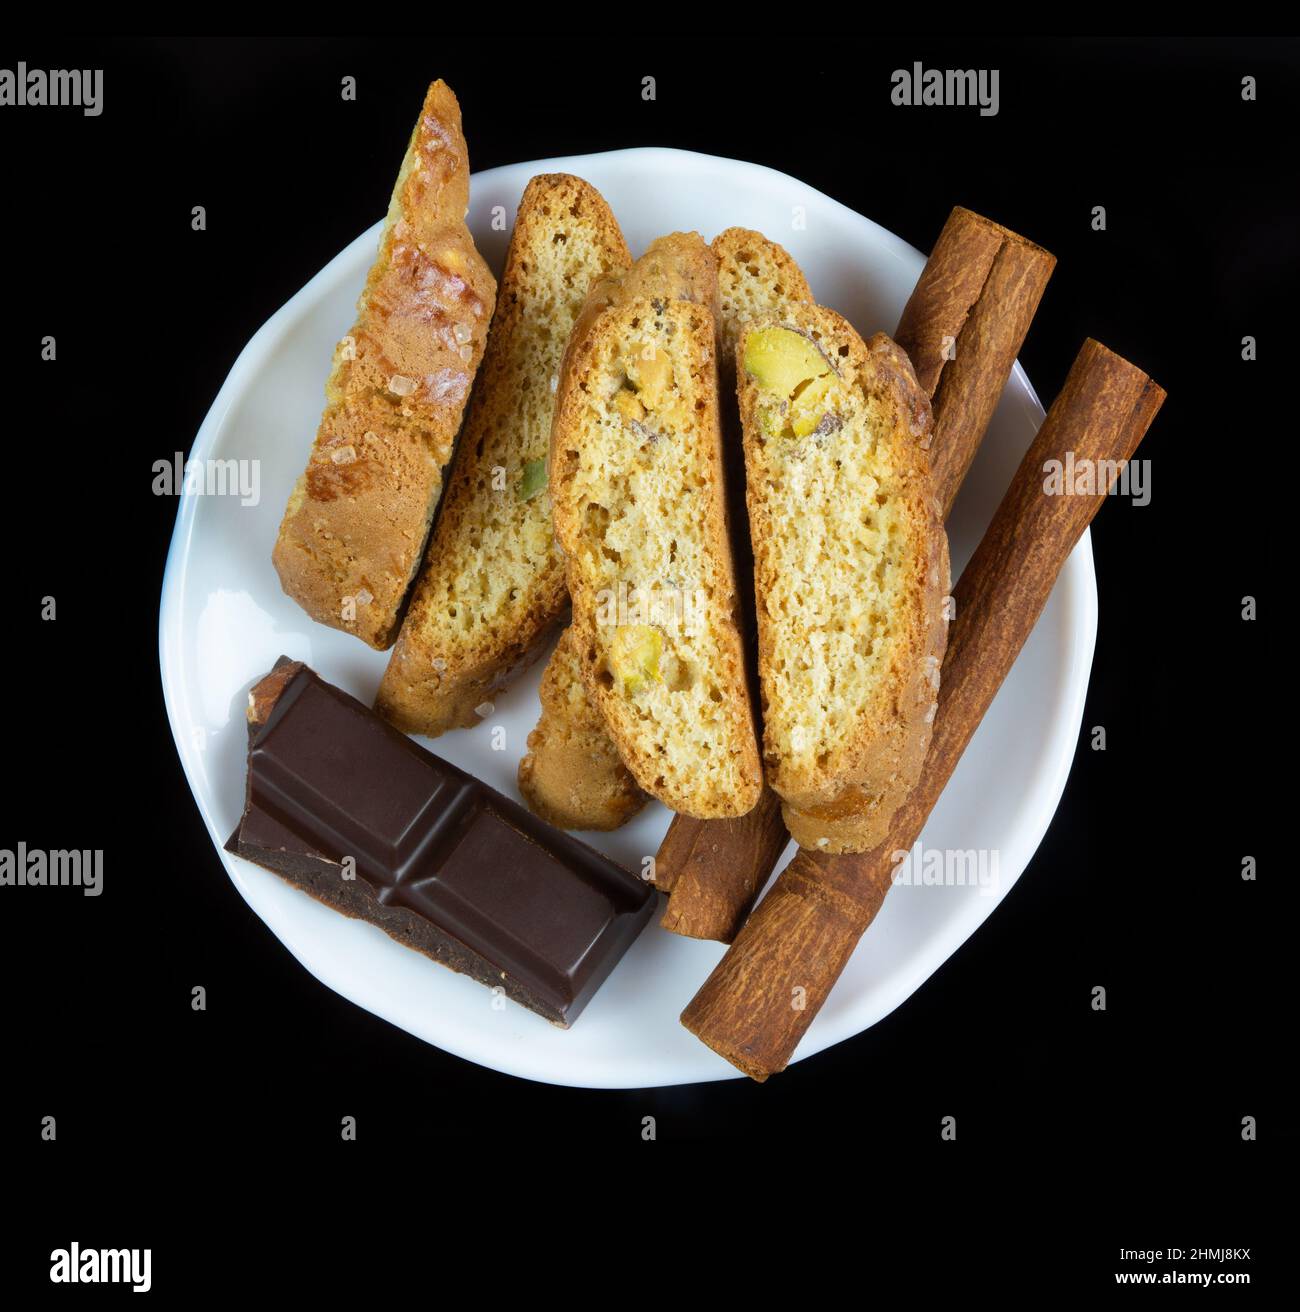 Cinnanon sticks, chocolate and bisquits in a white plate isolated over black background Stock Photo